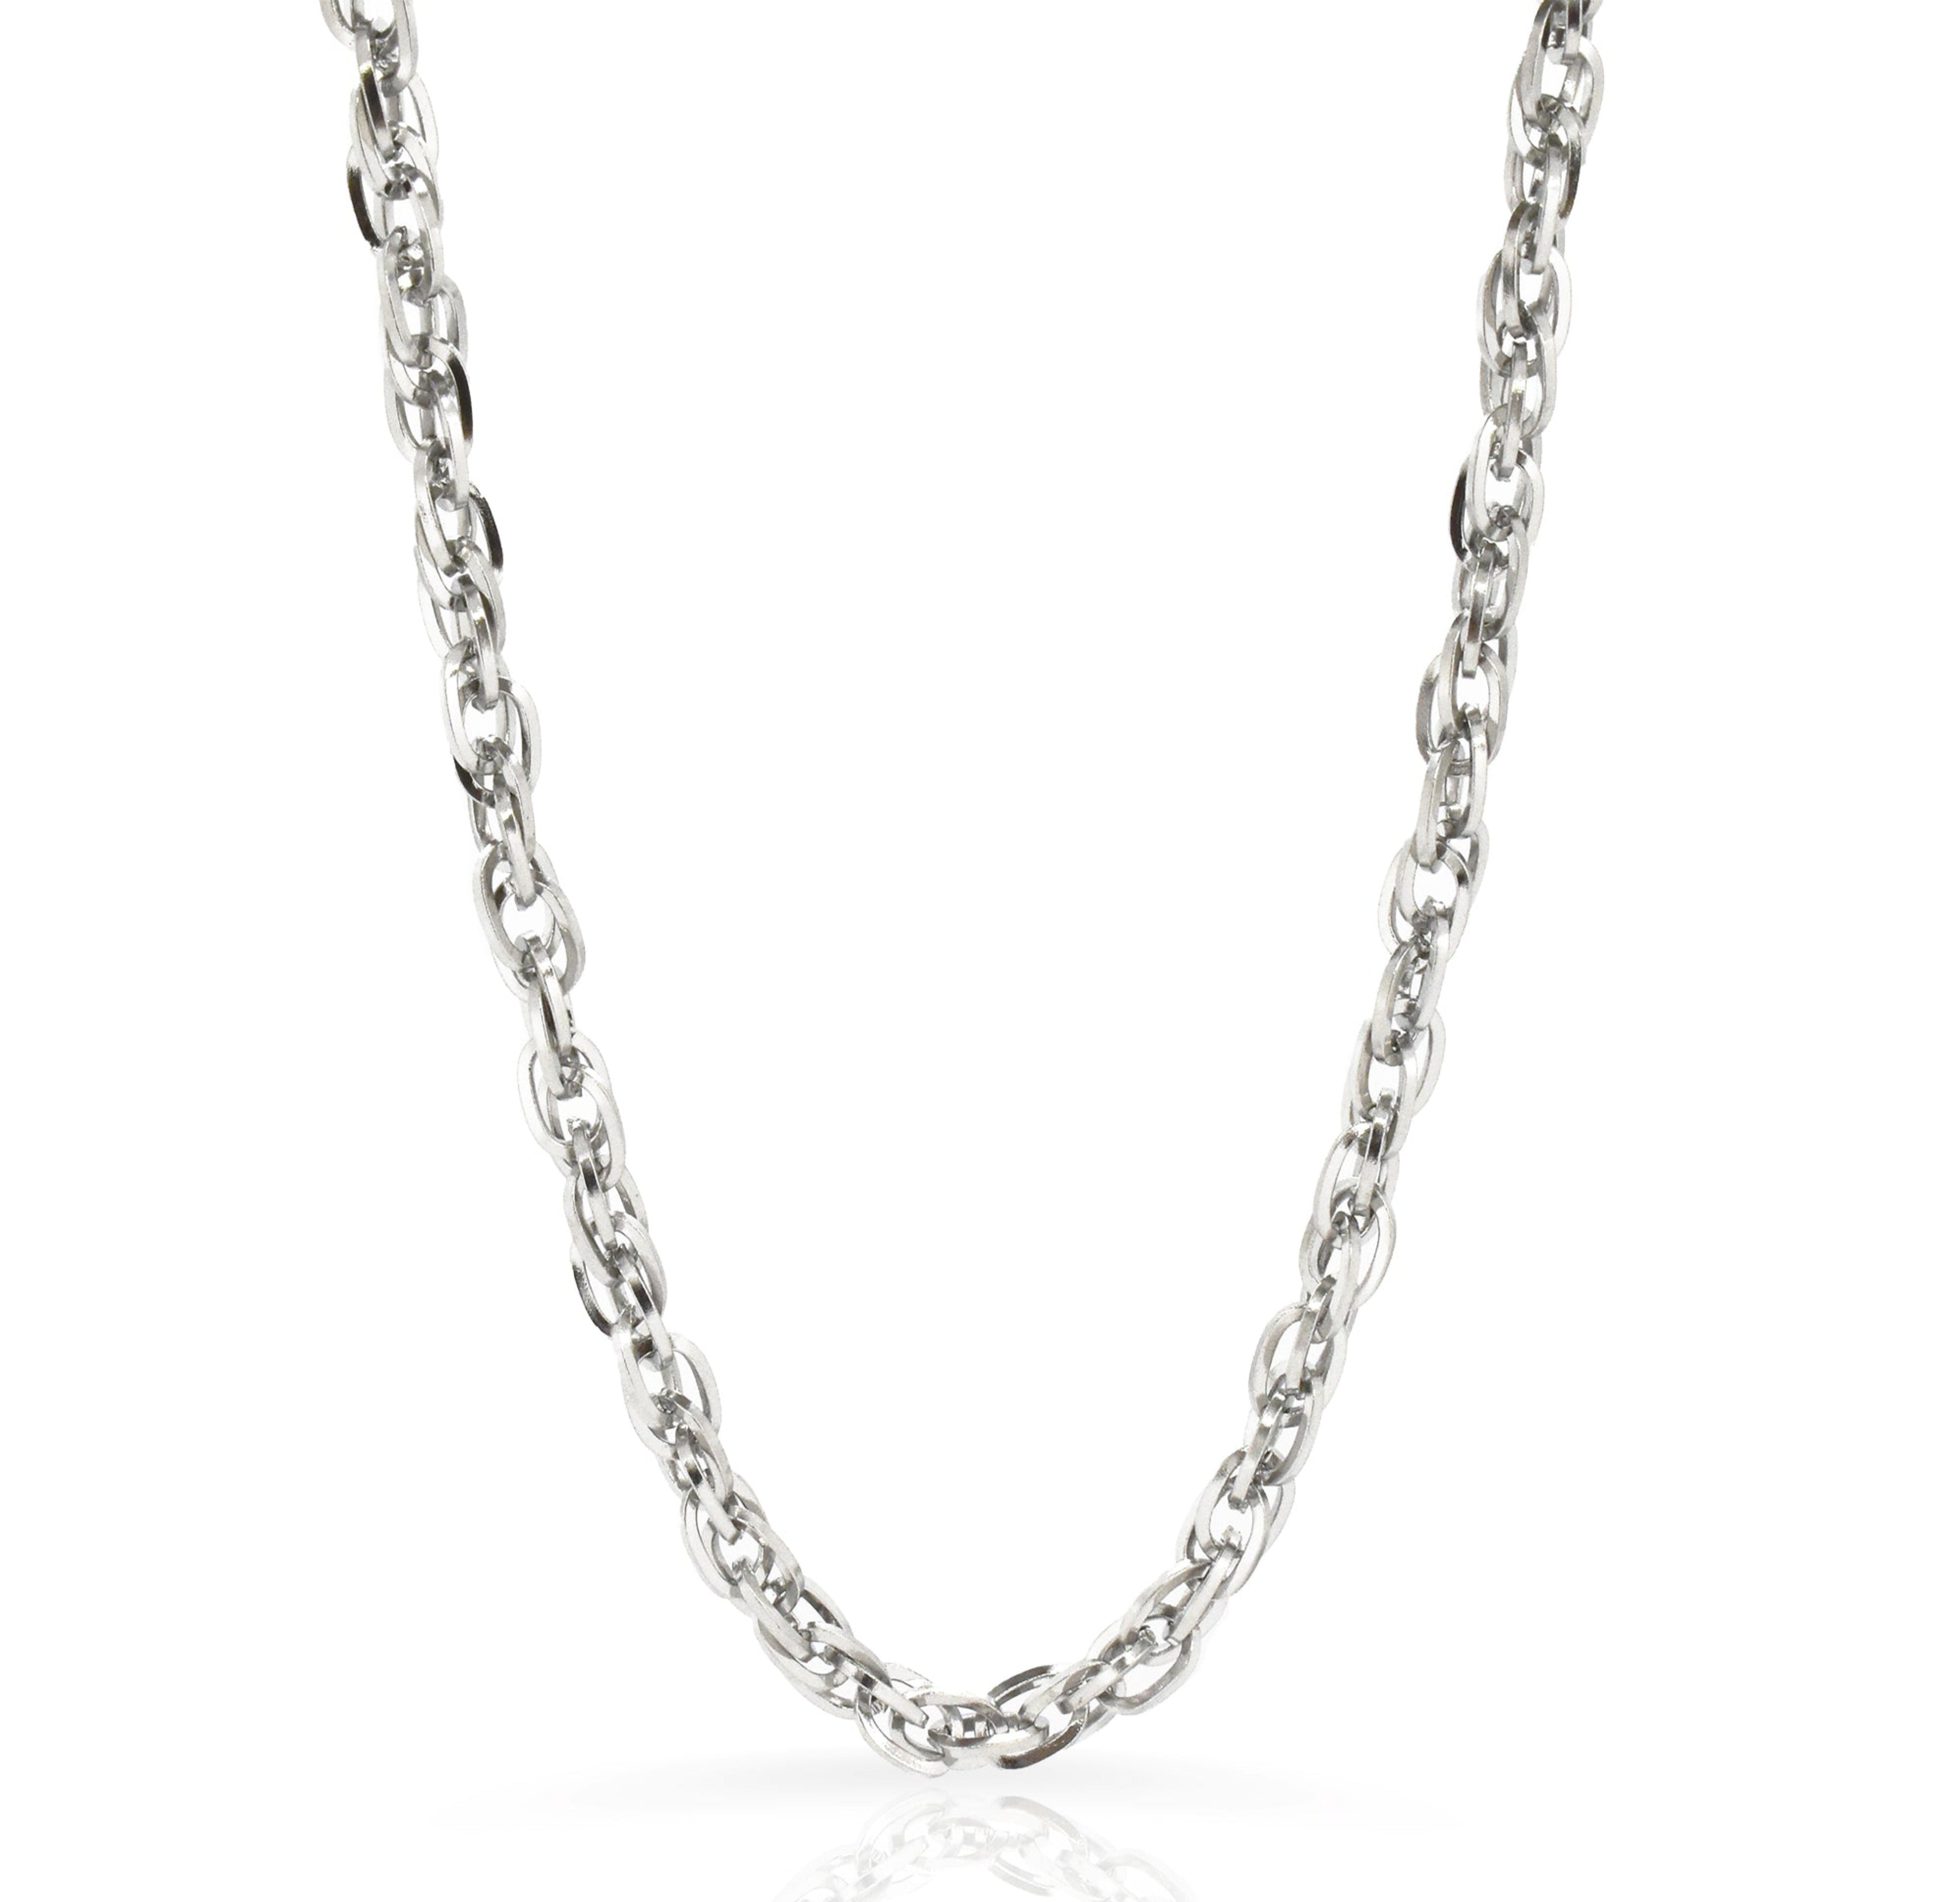 silver rope chain necklace adjustable 